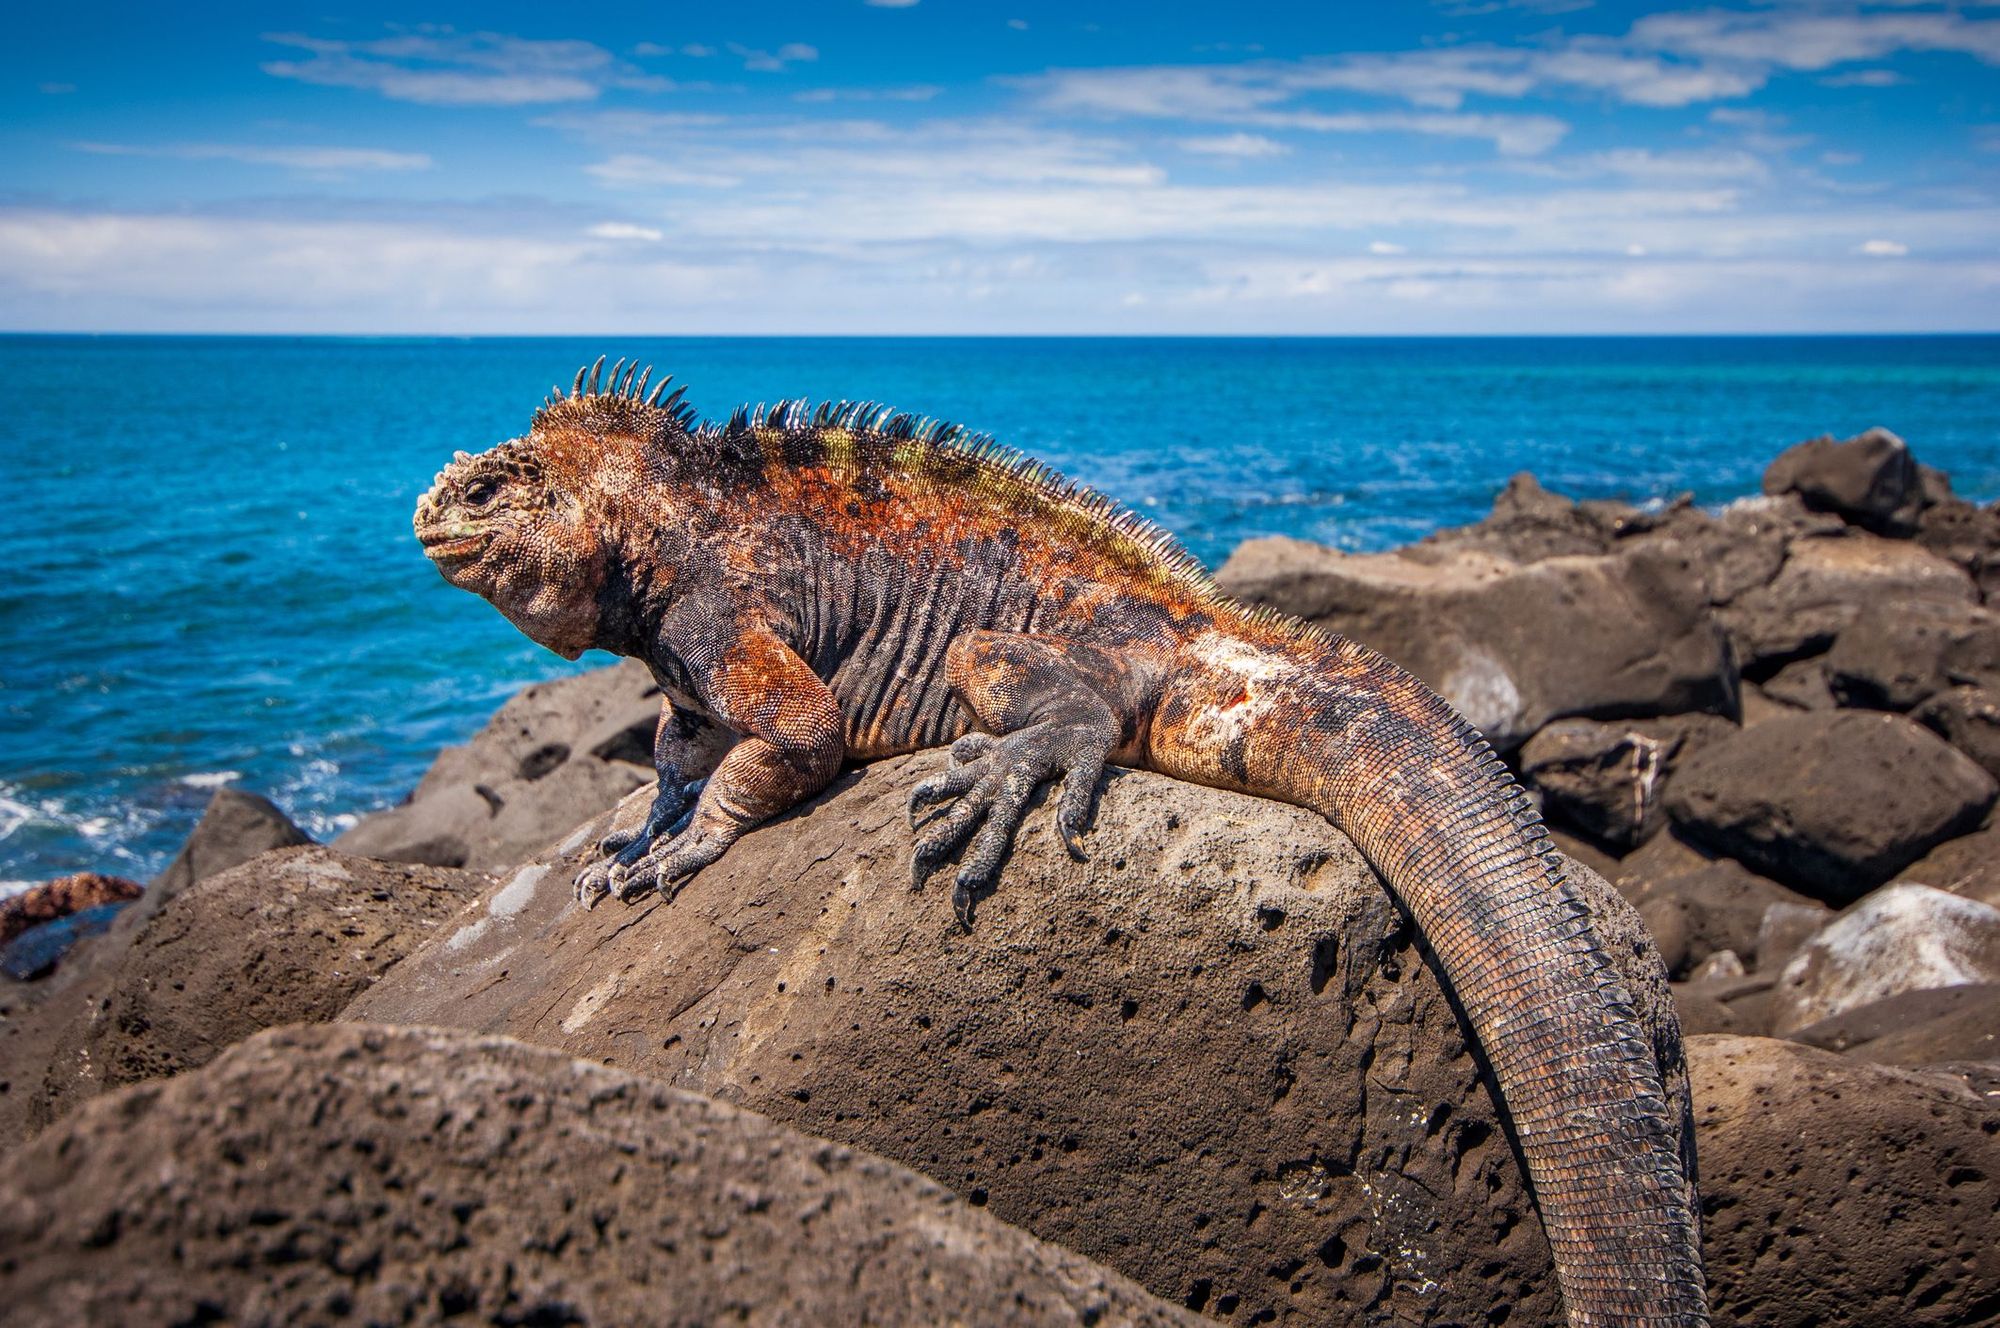 A Galapagos marine iguana, perching on the rocky shoreline of the Galapagos Islands